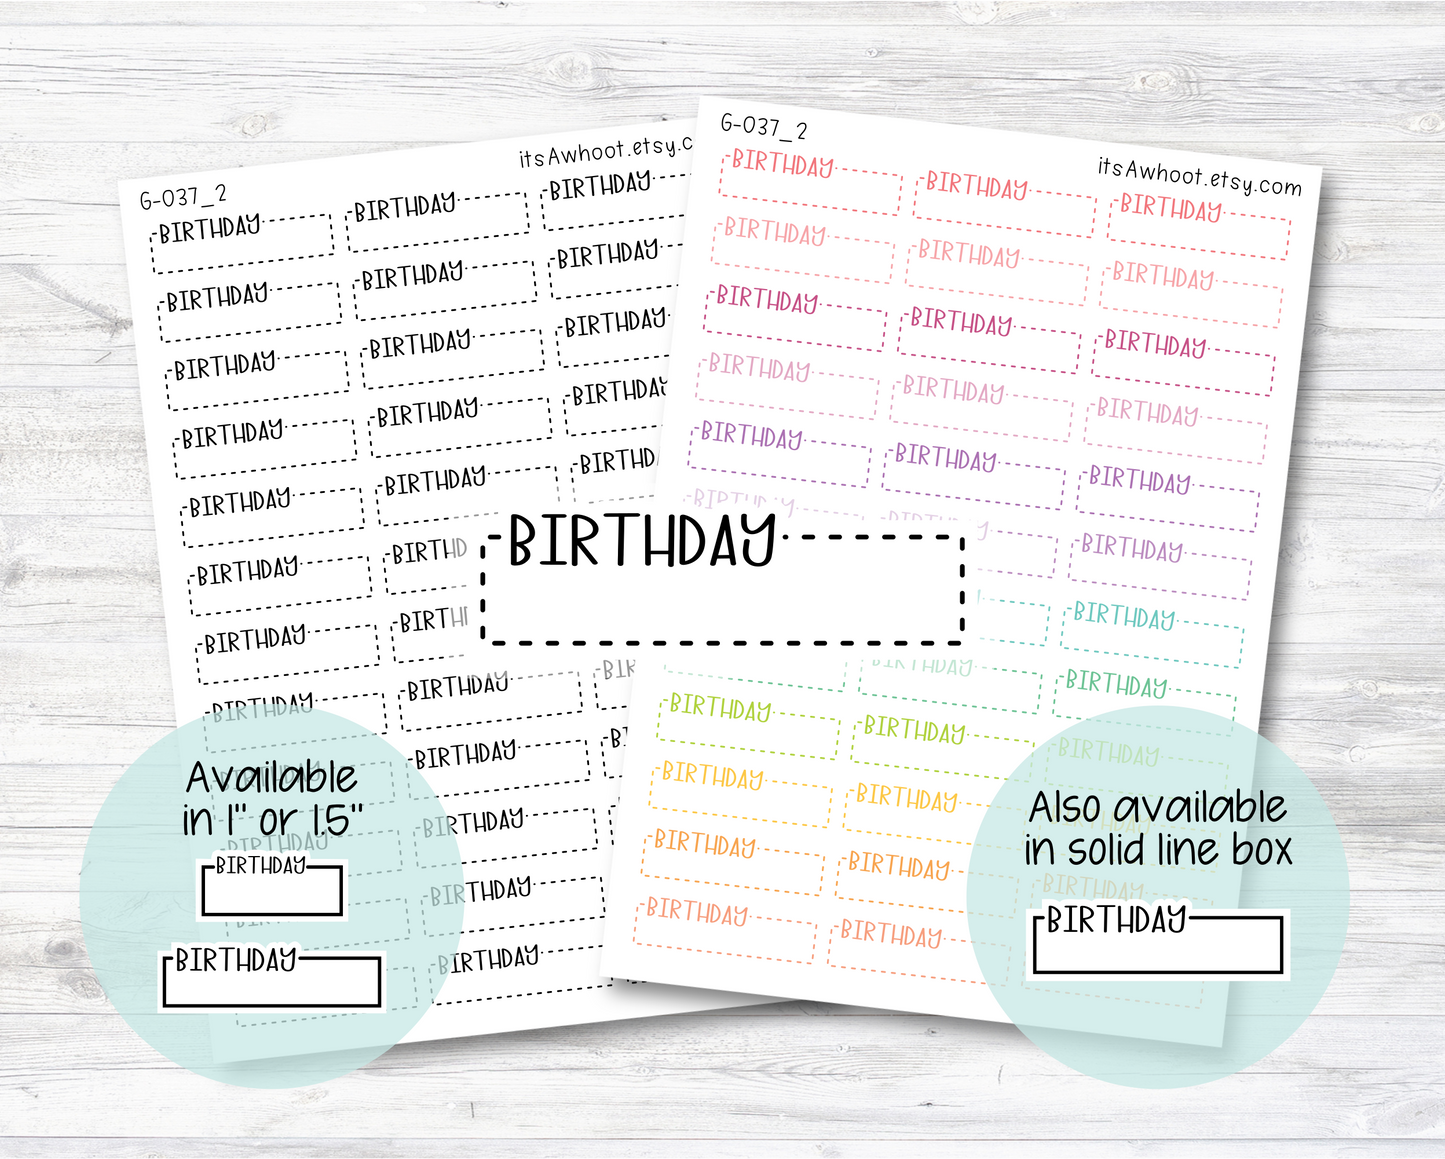 Birthday Quarter Box Label Planner Stickers - Dash or Solid / One Inch or 1.5" Inch (G037_2)